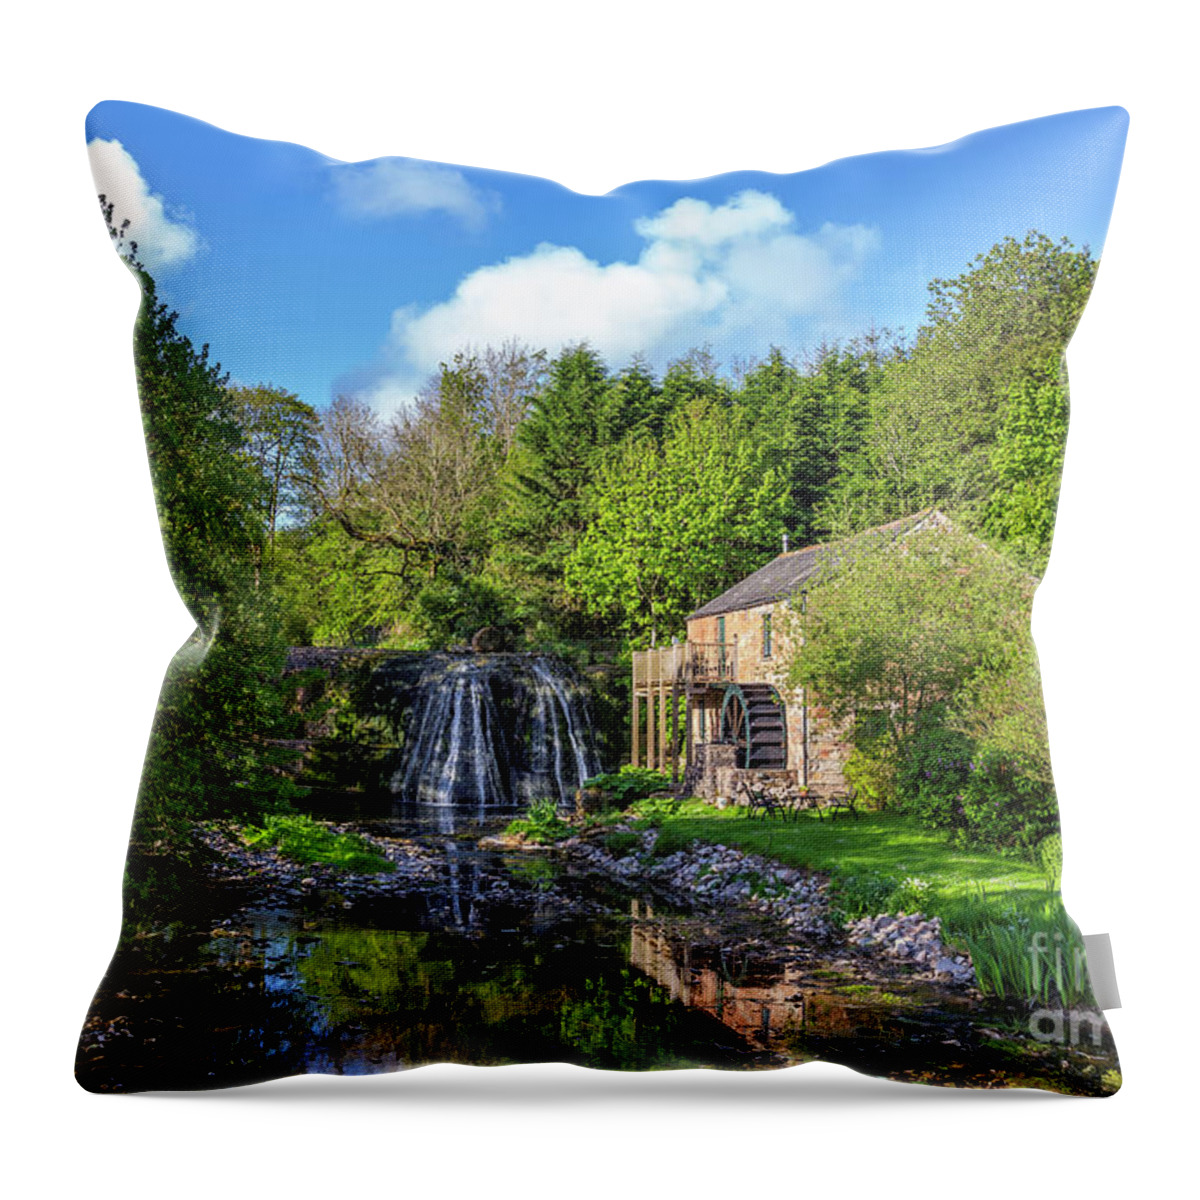 England Throw Pillow featuring the photograph Rutter Falls by Tom Holmes Photography